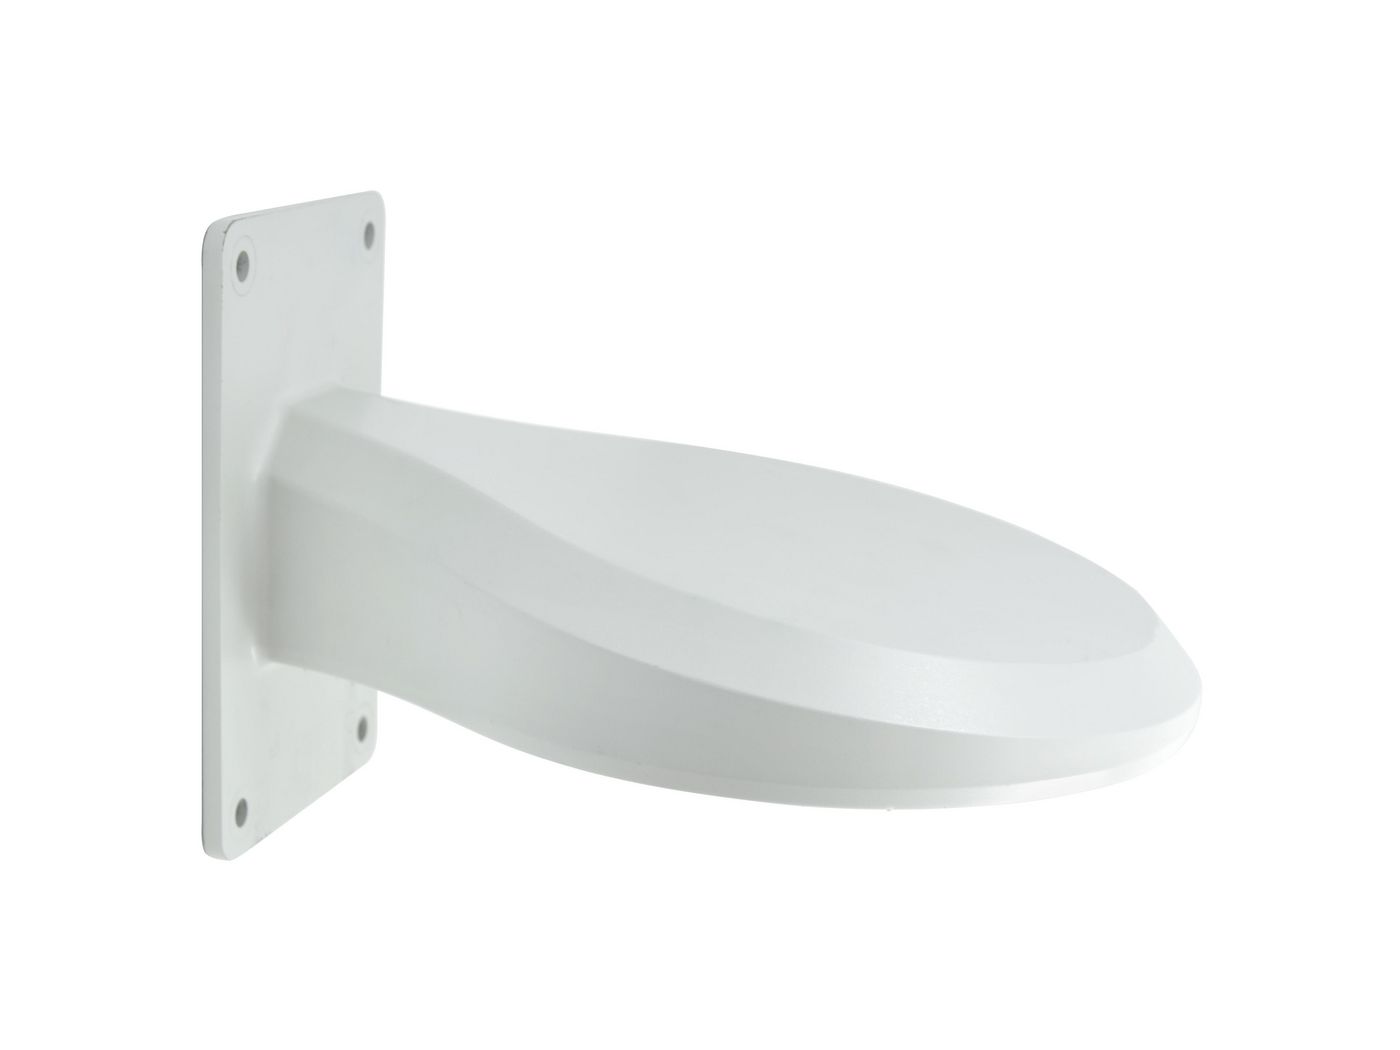 LevelOne CAS-2313 WALL MOUNT 